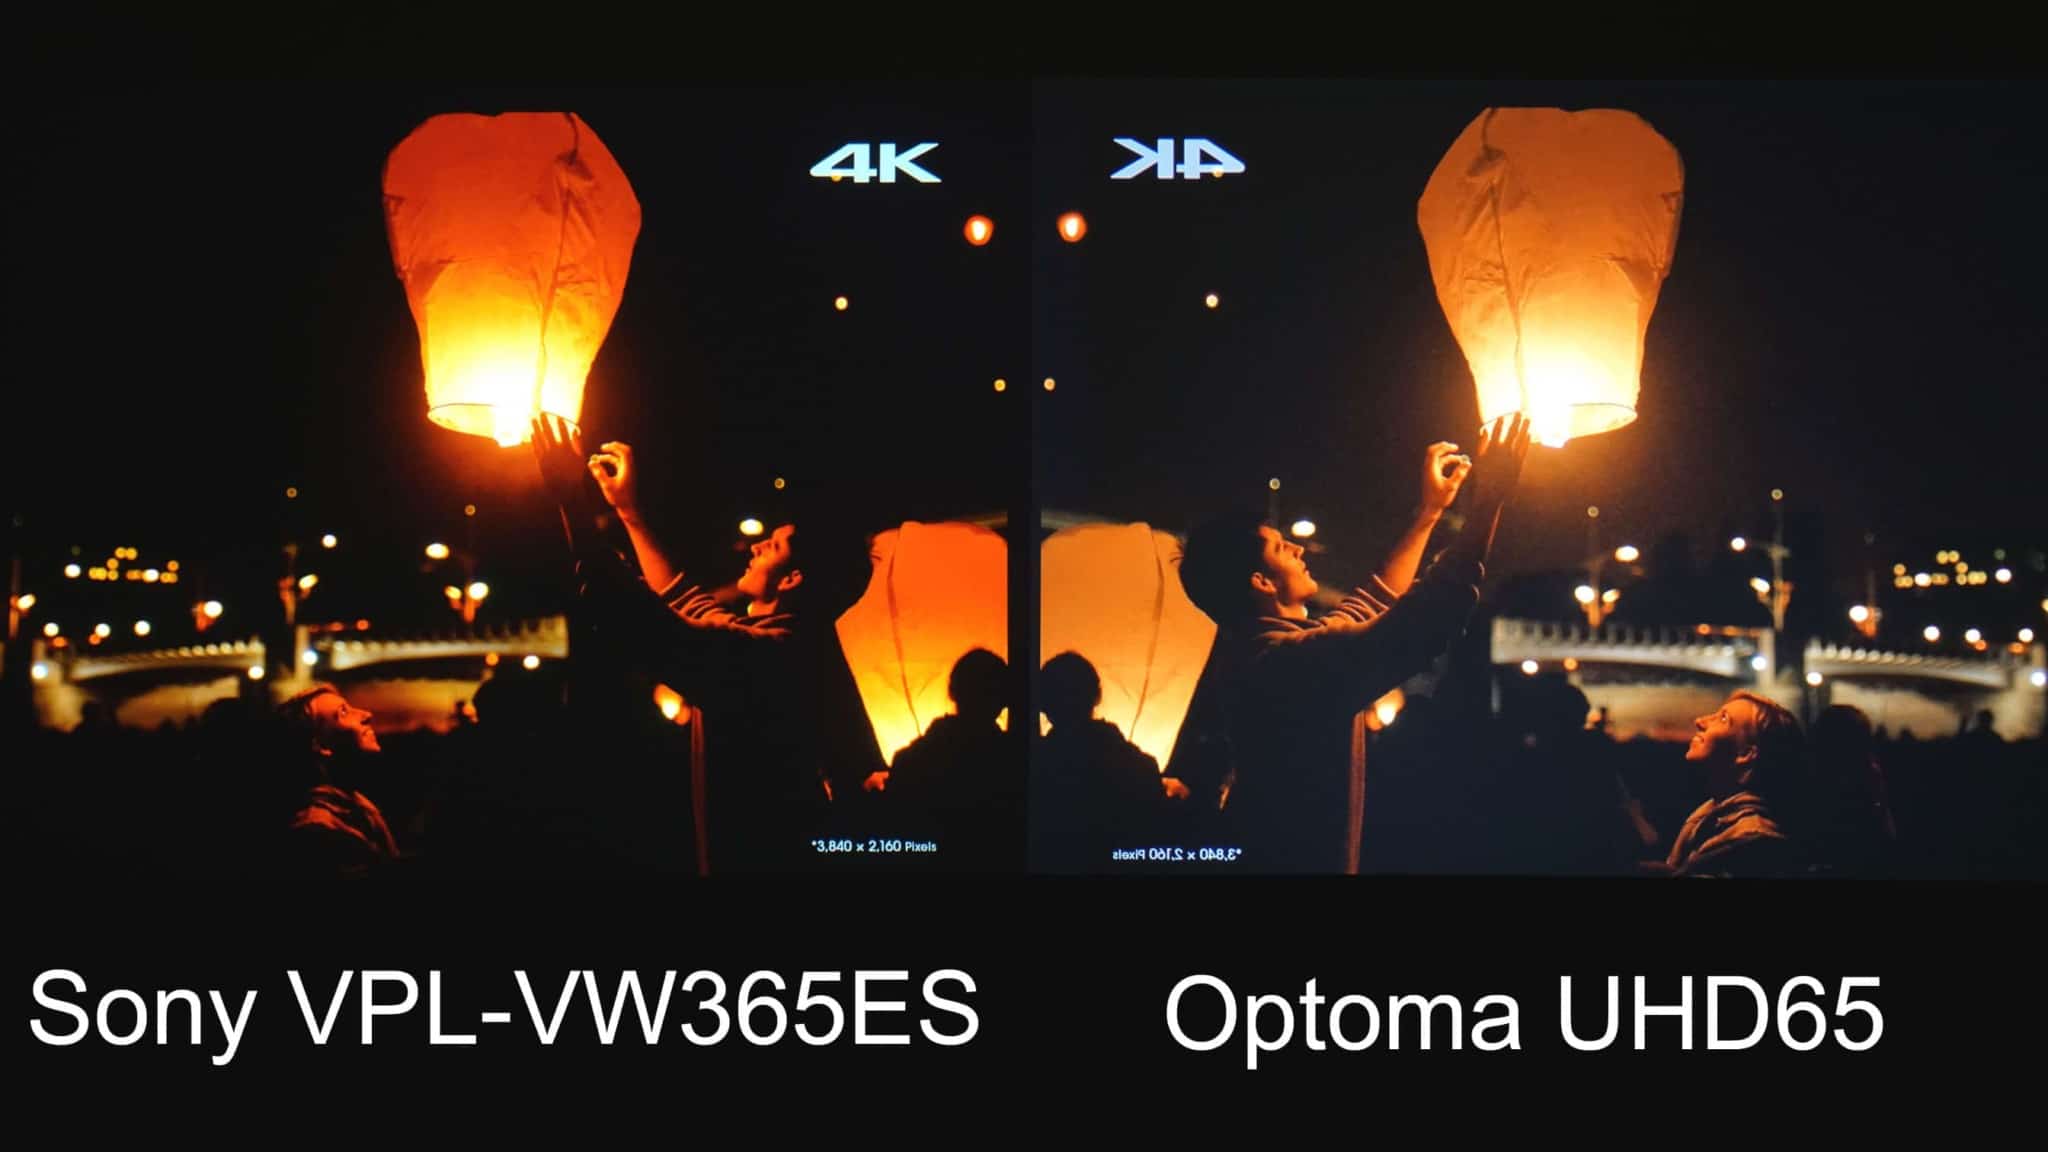 Sony VPL-VW365ES vs Optoma UHD65: Sony clearly has better blacks and brighter highlights. The Sony VPL-VW365ES is in low lamp mode and the Optoma is in its Highest.